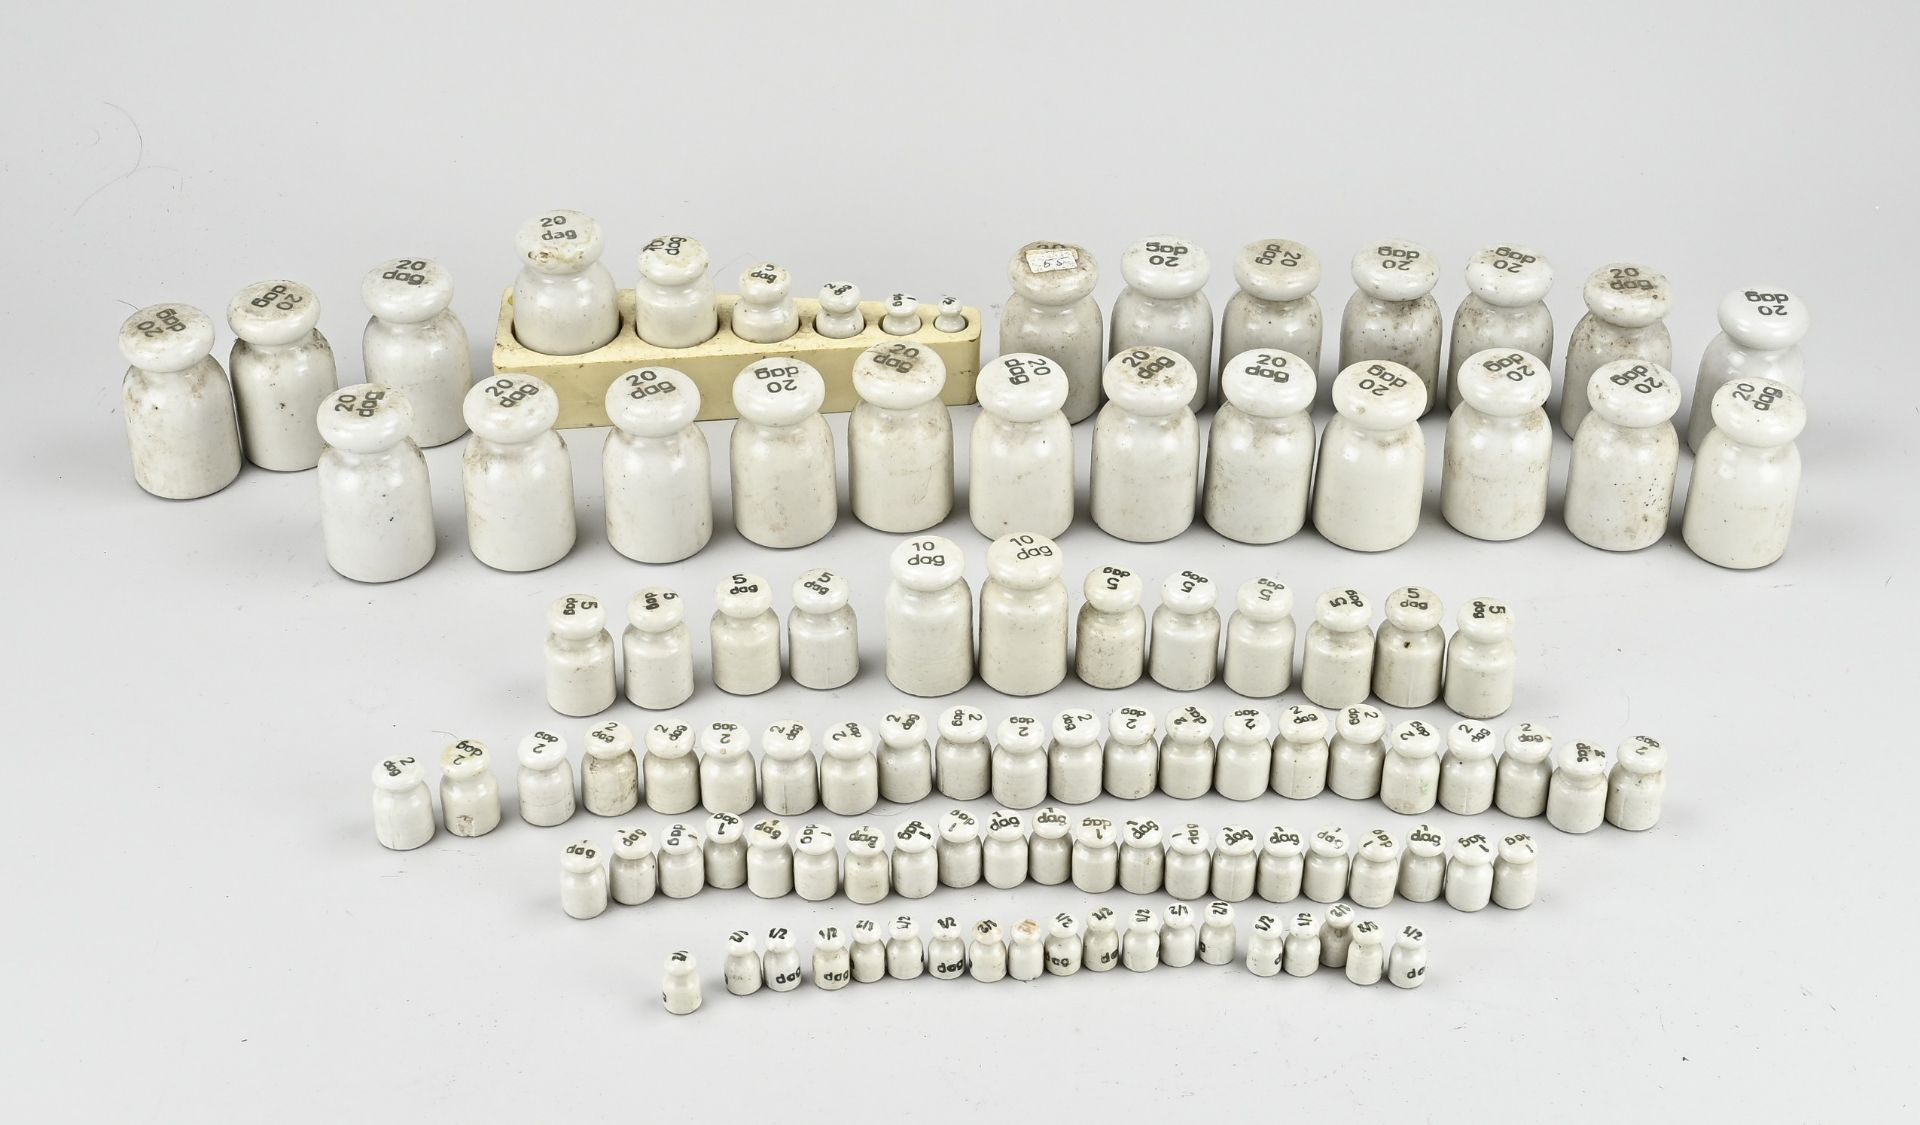 Lot of porcelain weights